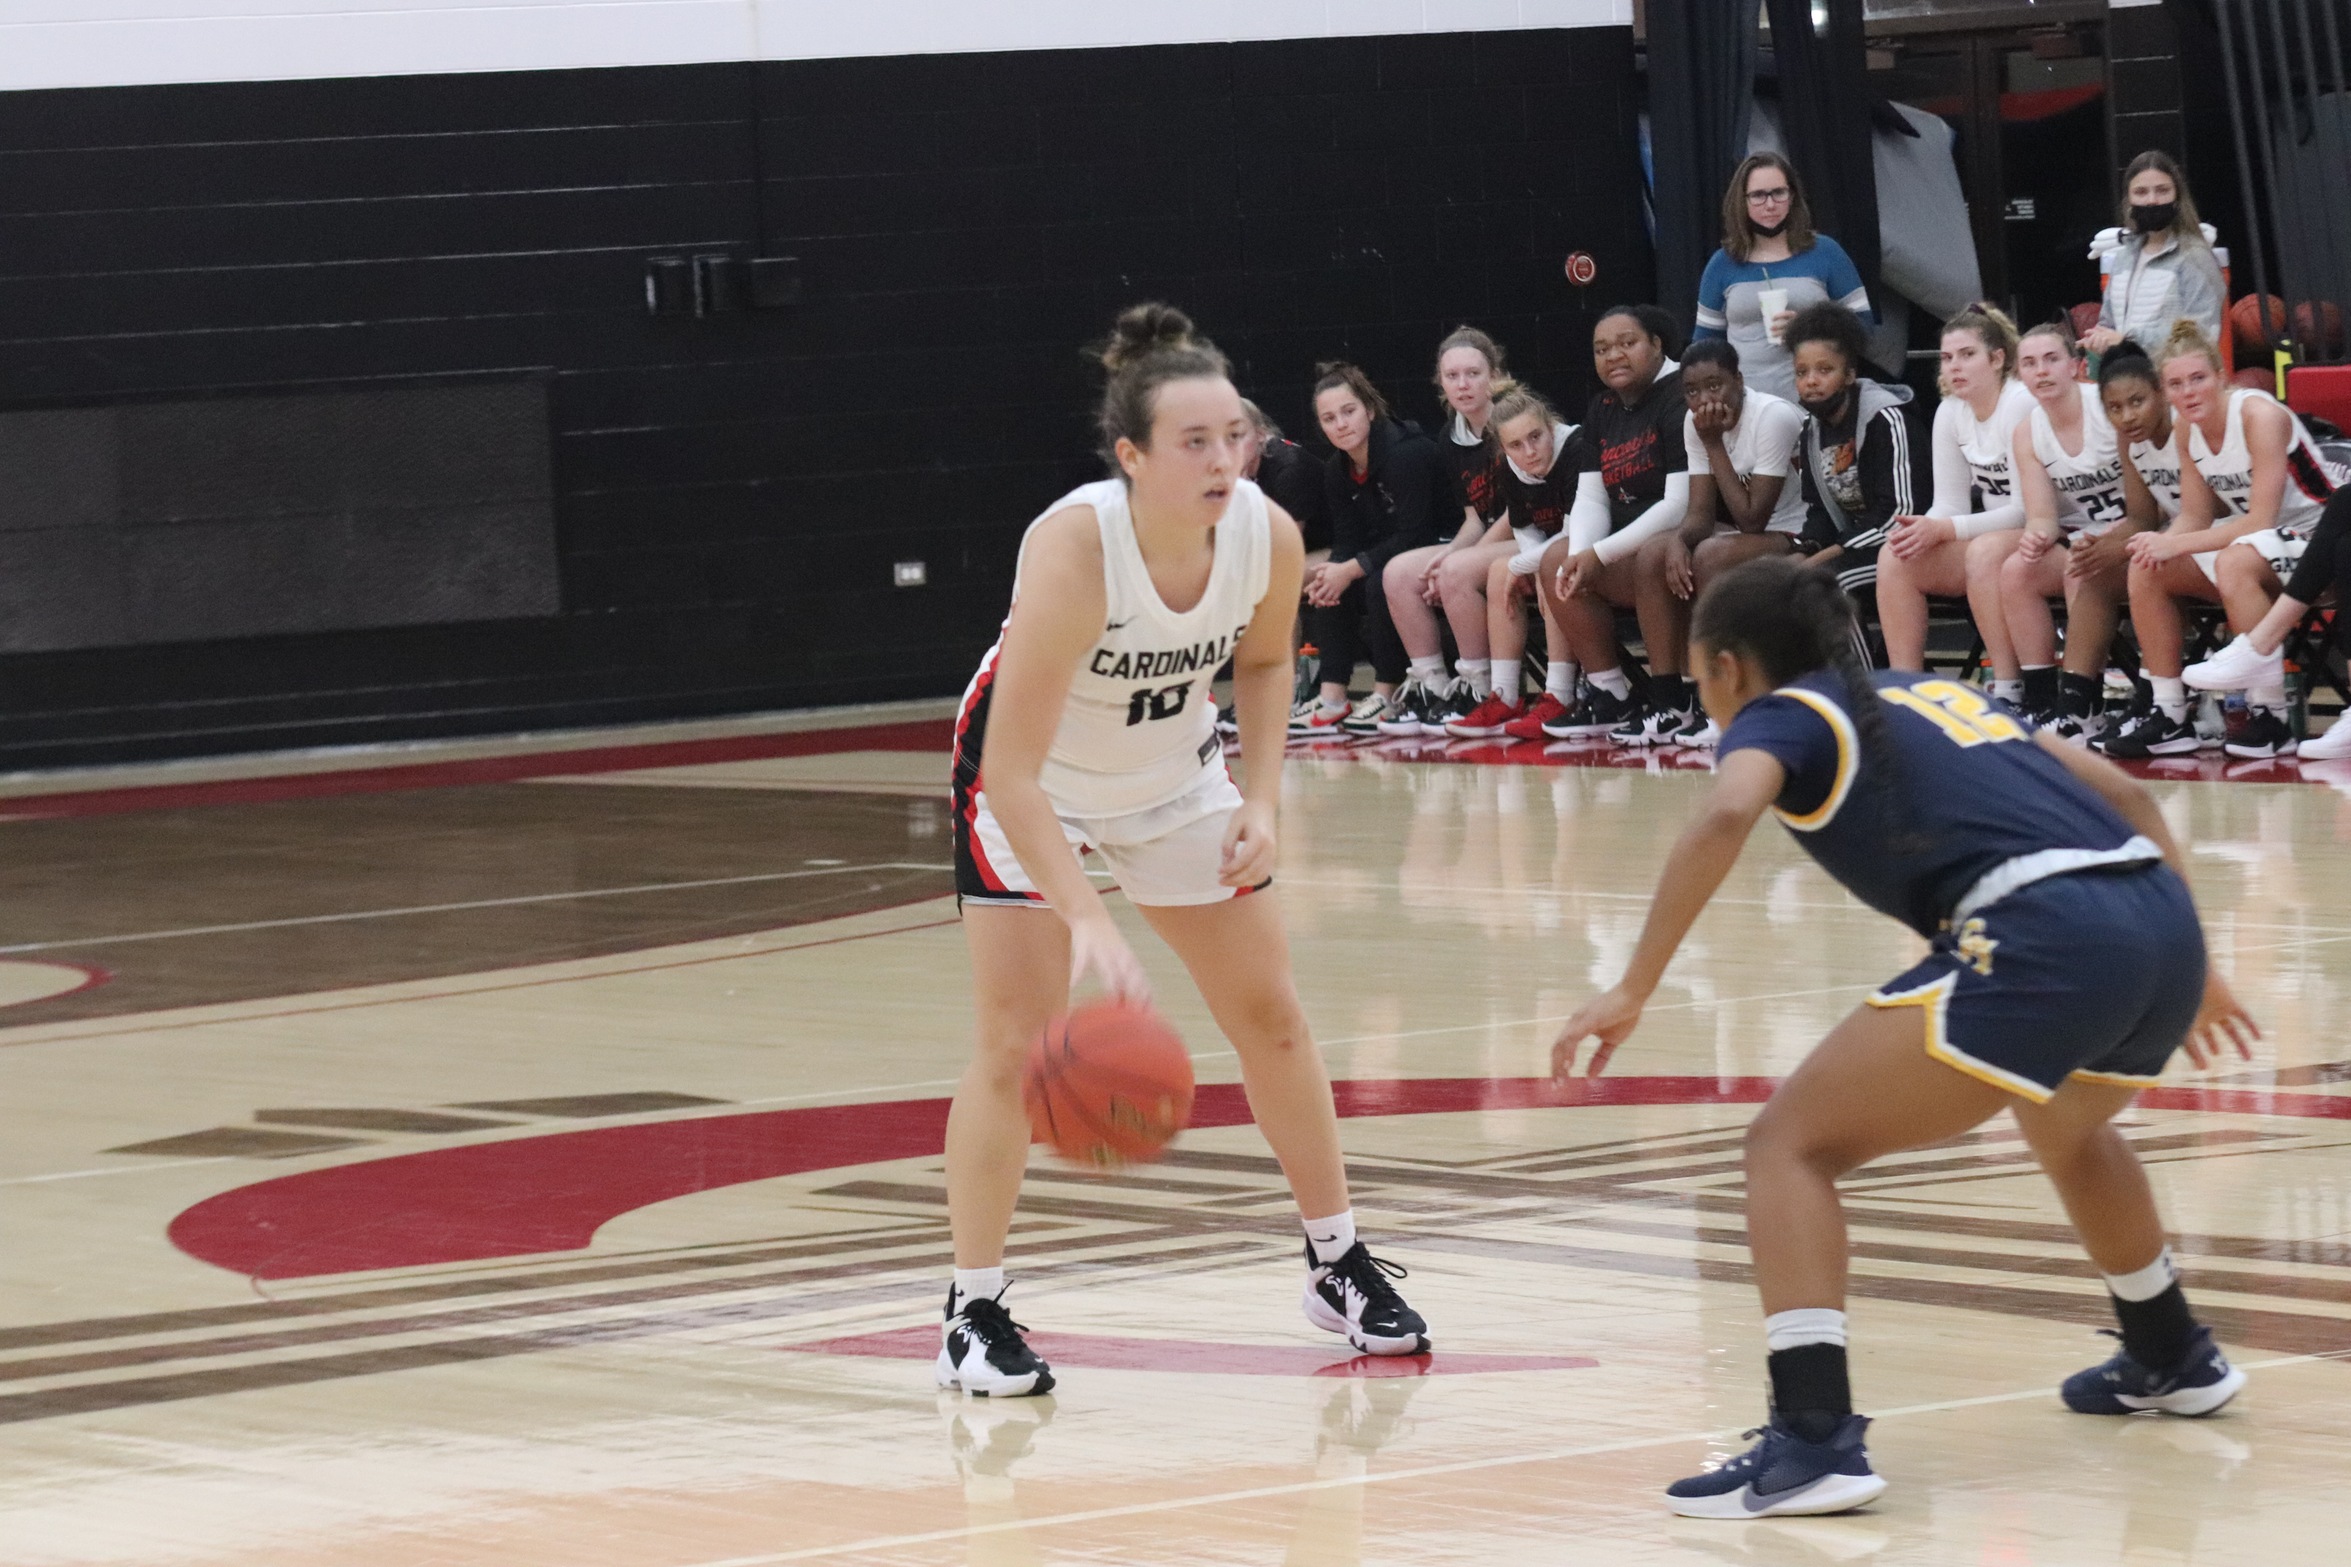 Tripp's layup gives Women's Basketball first conference win of season